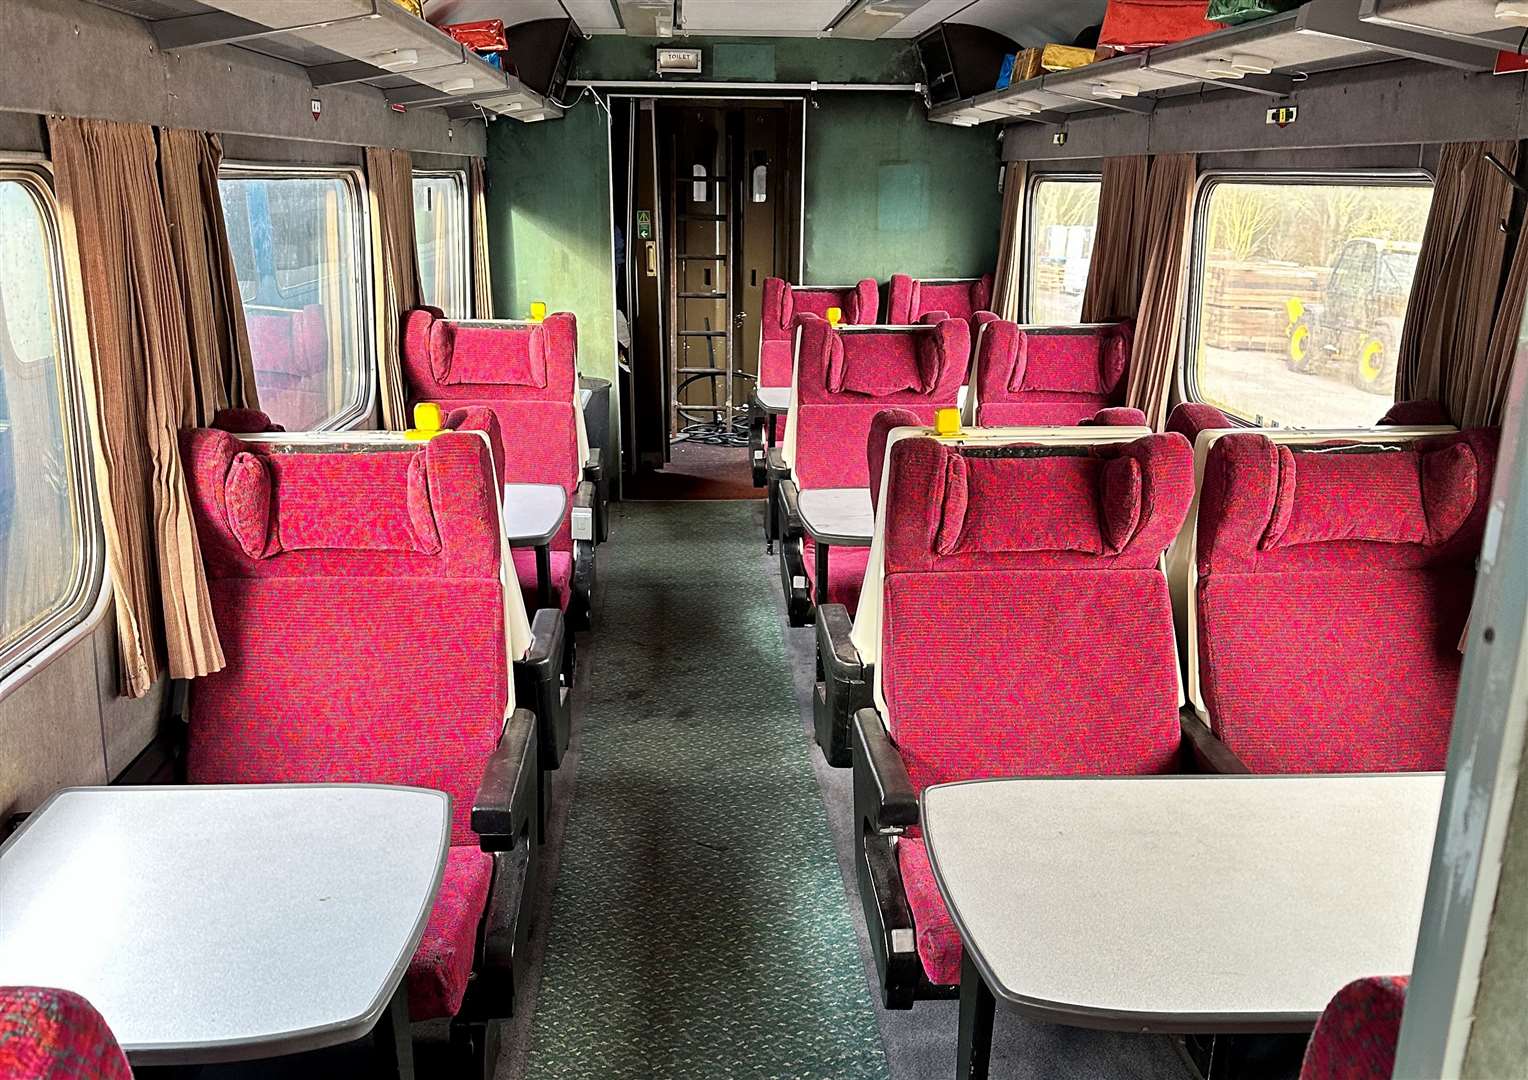 The train carriage will become a “hospitality traing academy” for Five Acre Wood pupils. Picture: Five Acre Wood